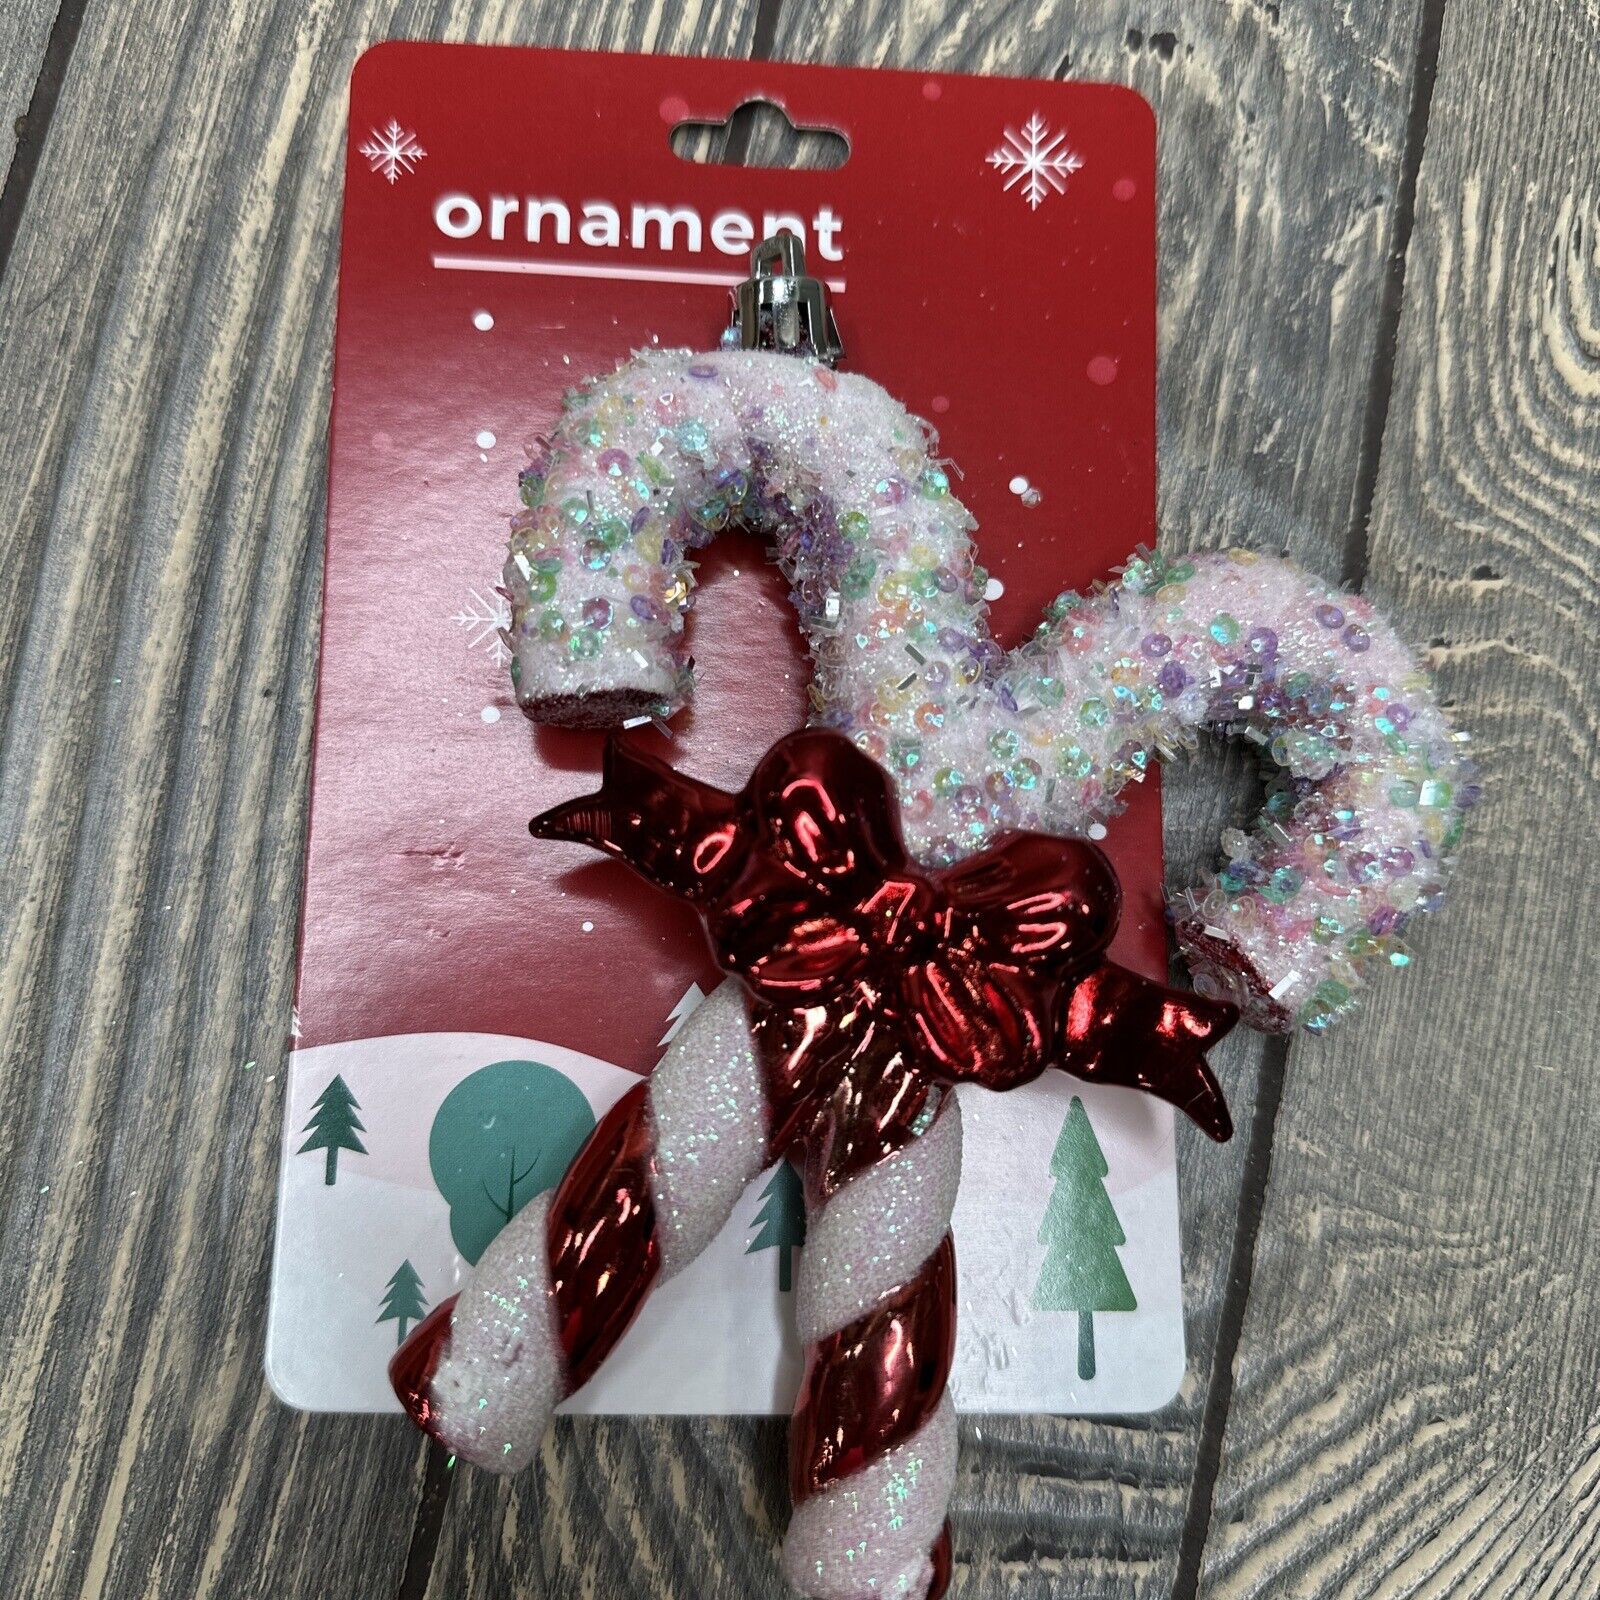 Happy Home By Rite Aid Christmas Ornament Candy Cane Sugar Glitter